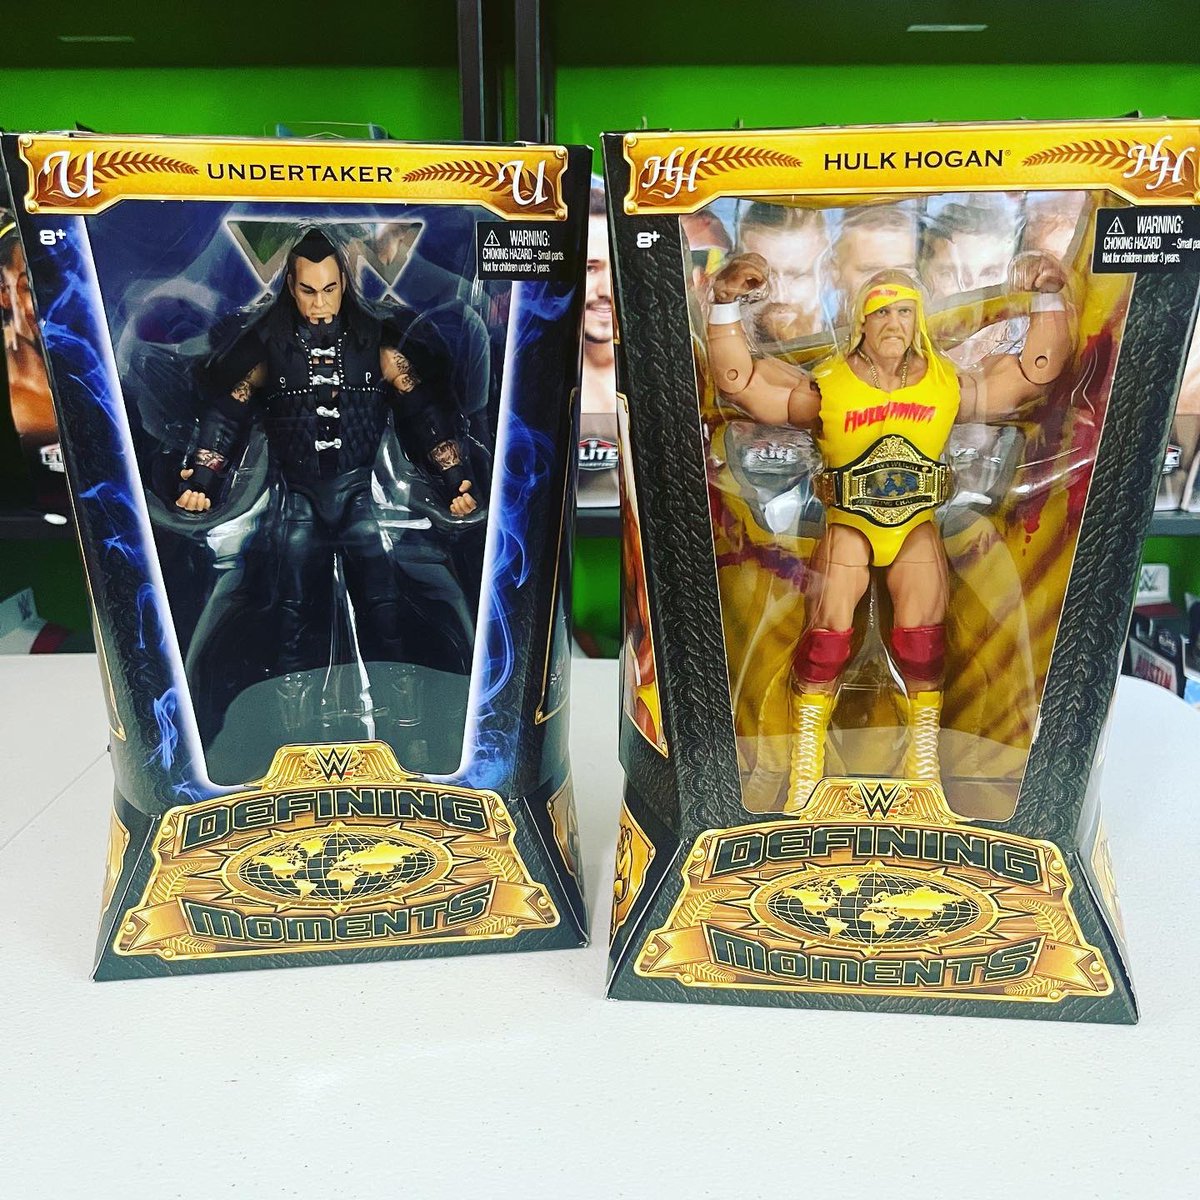 It’s Hump Day! New figures in the Vault today! Check these out and more at bodyslamtoys.com

#bodyslamtoys #figlife #wweelite #wrestlingfigures #wwefigures #wwe #wwetoys #wwelegend #actionfigures #smallbusiness #wrestlingtoys